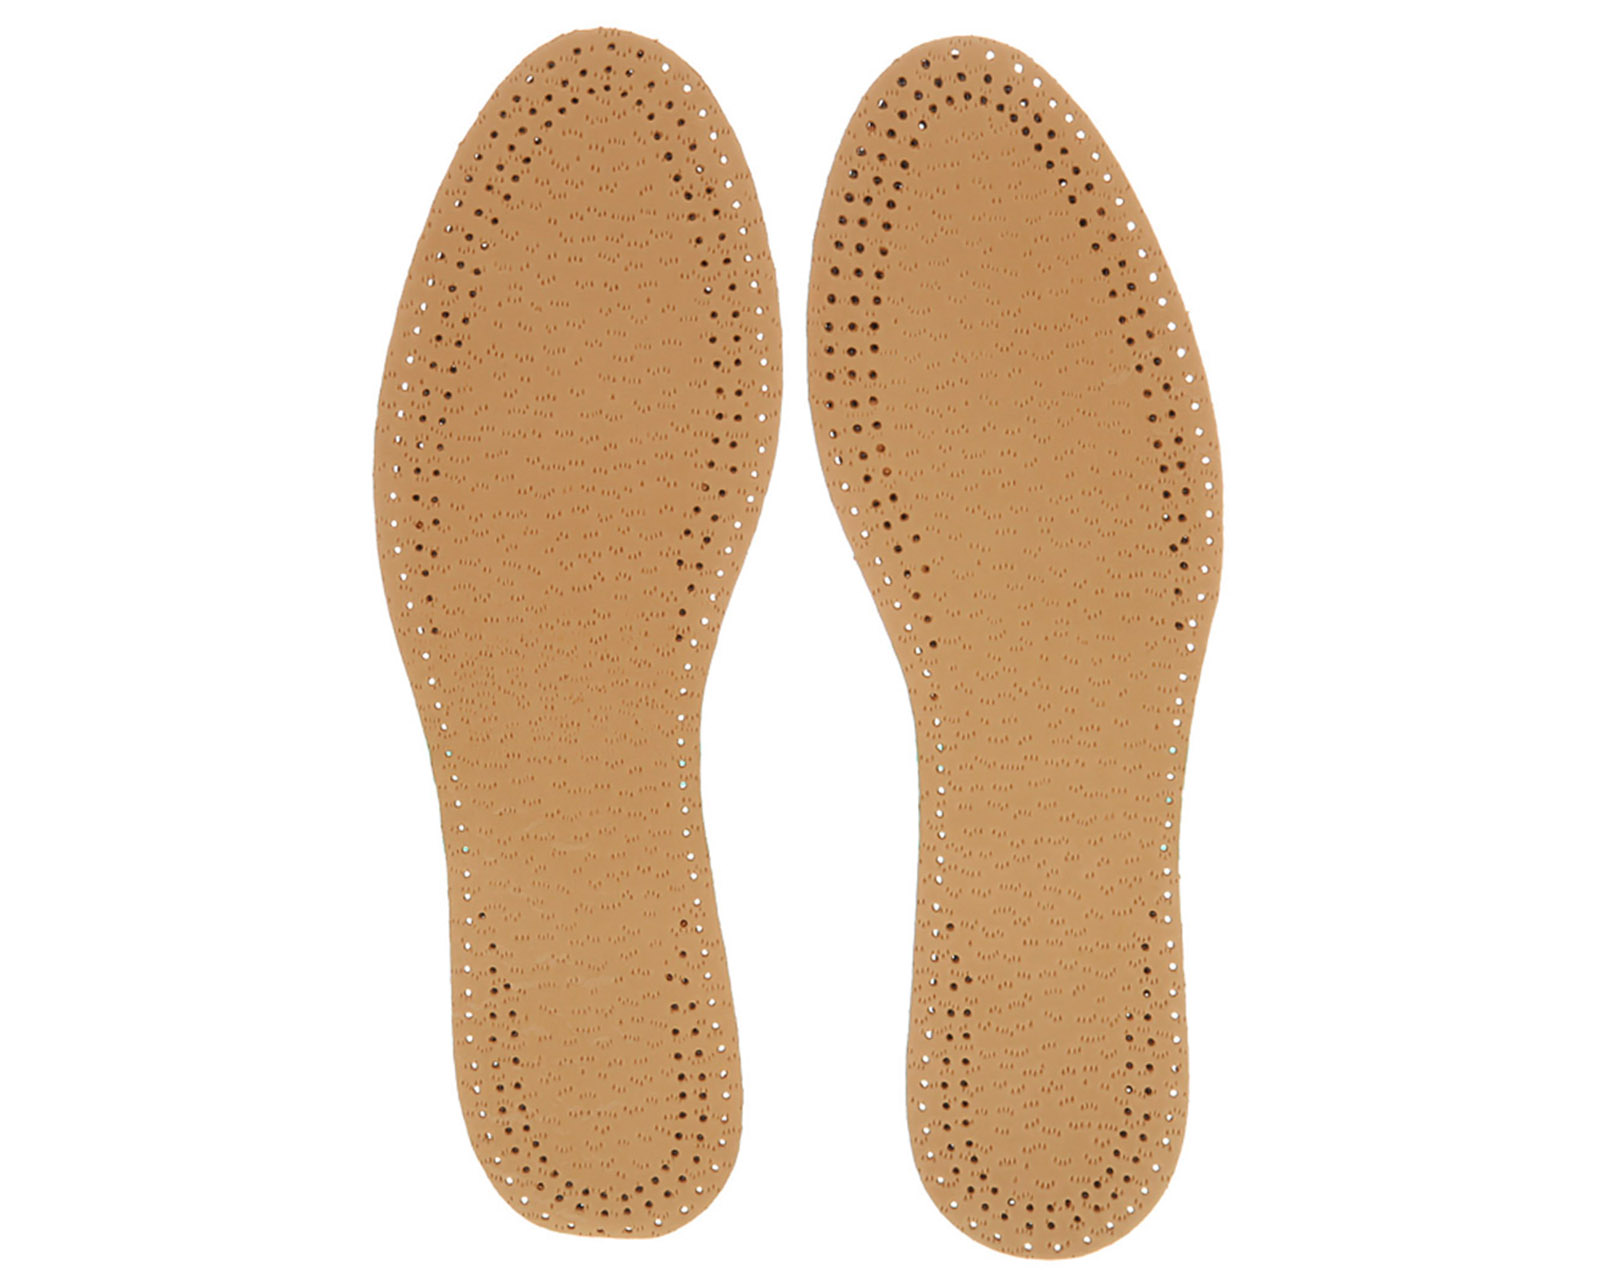 OFFICE Leather Insoles In Brown, 6